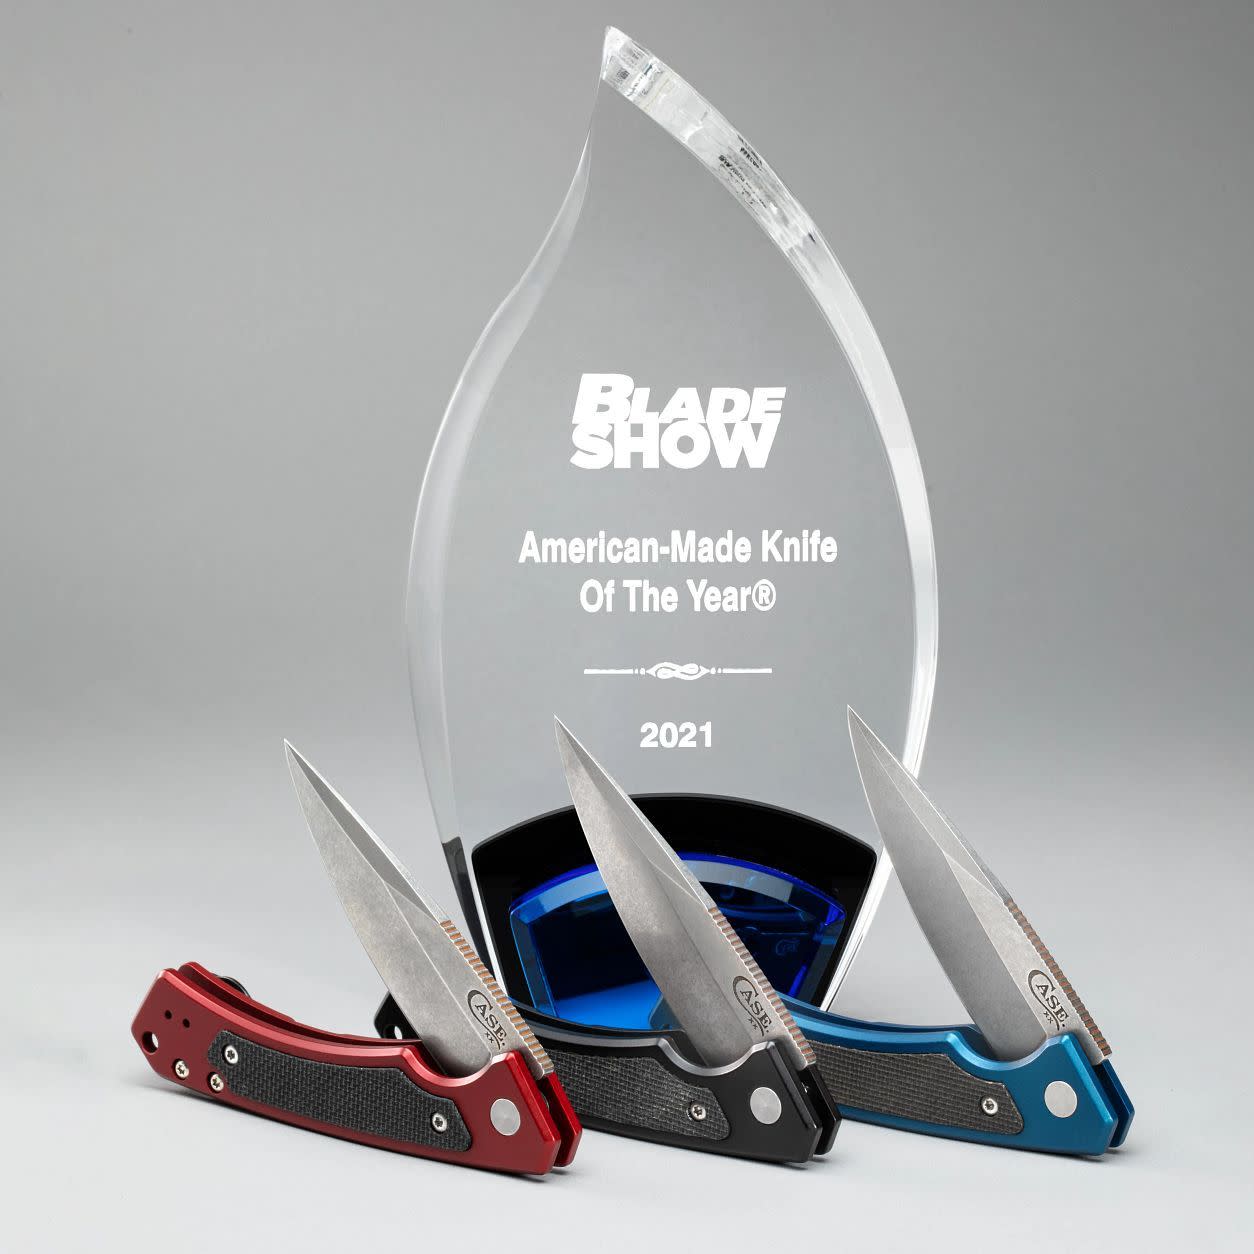 Black Anodized Aluminum G-10 Marilla® Knife in front of Blade Show American-Made Knife of the Year Award